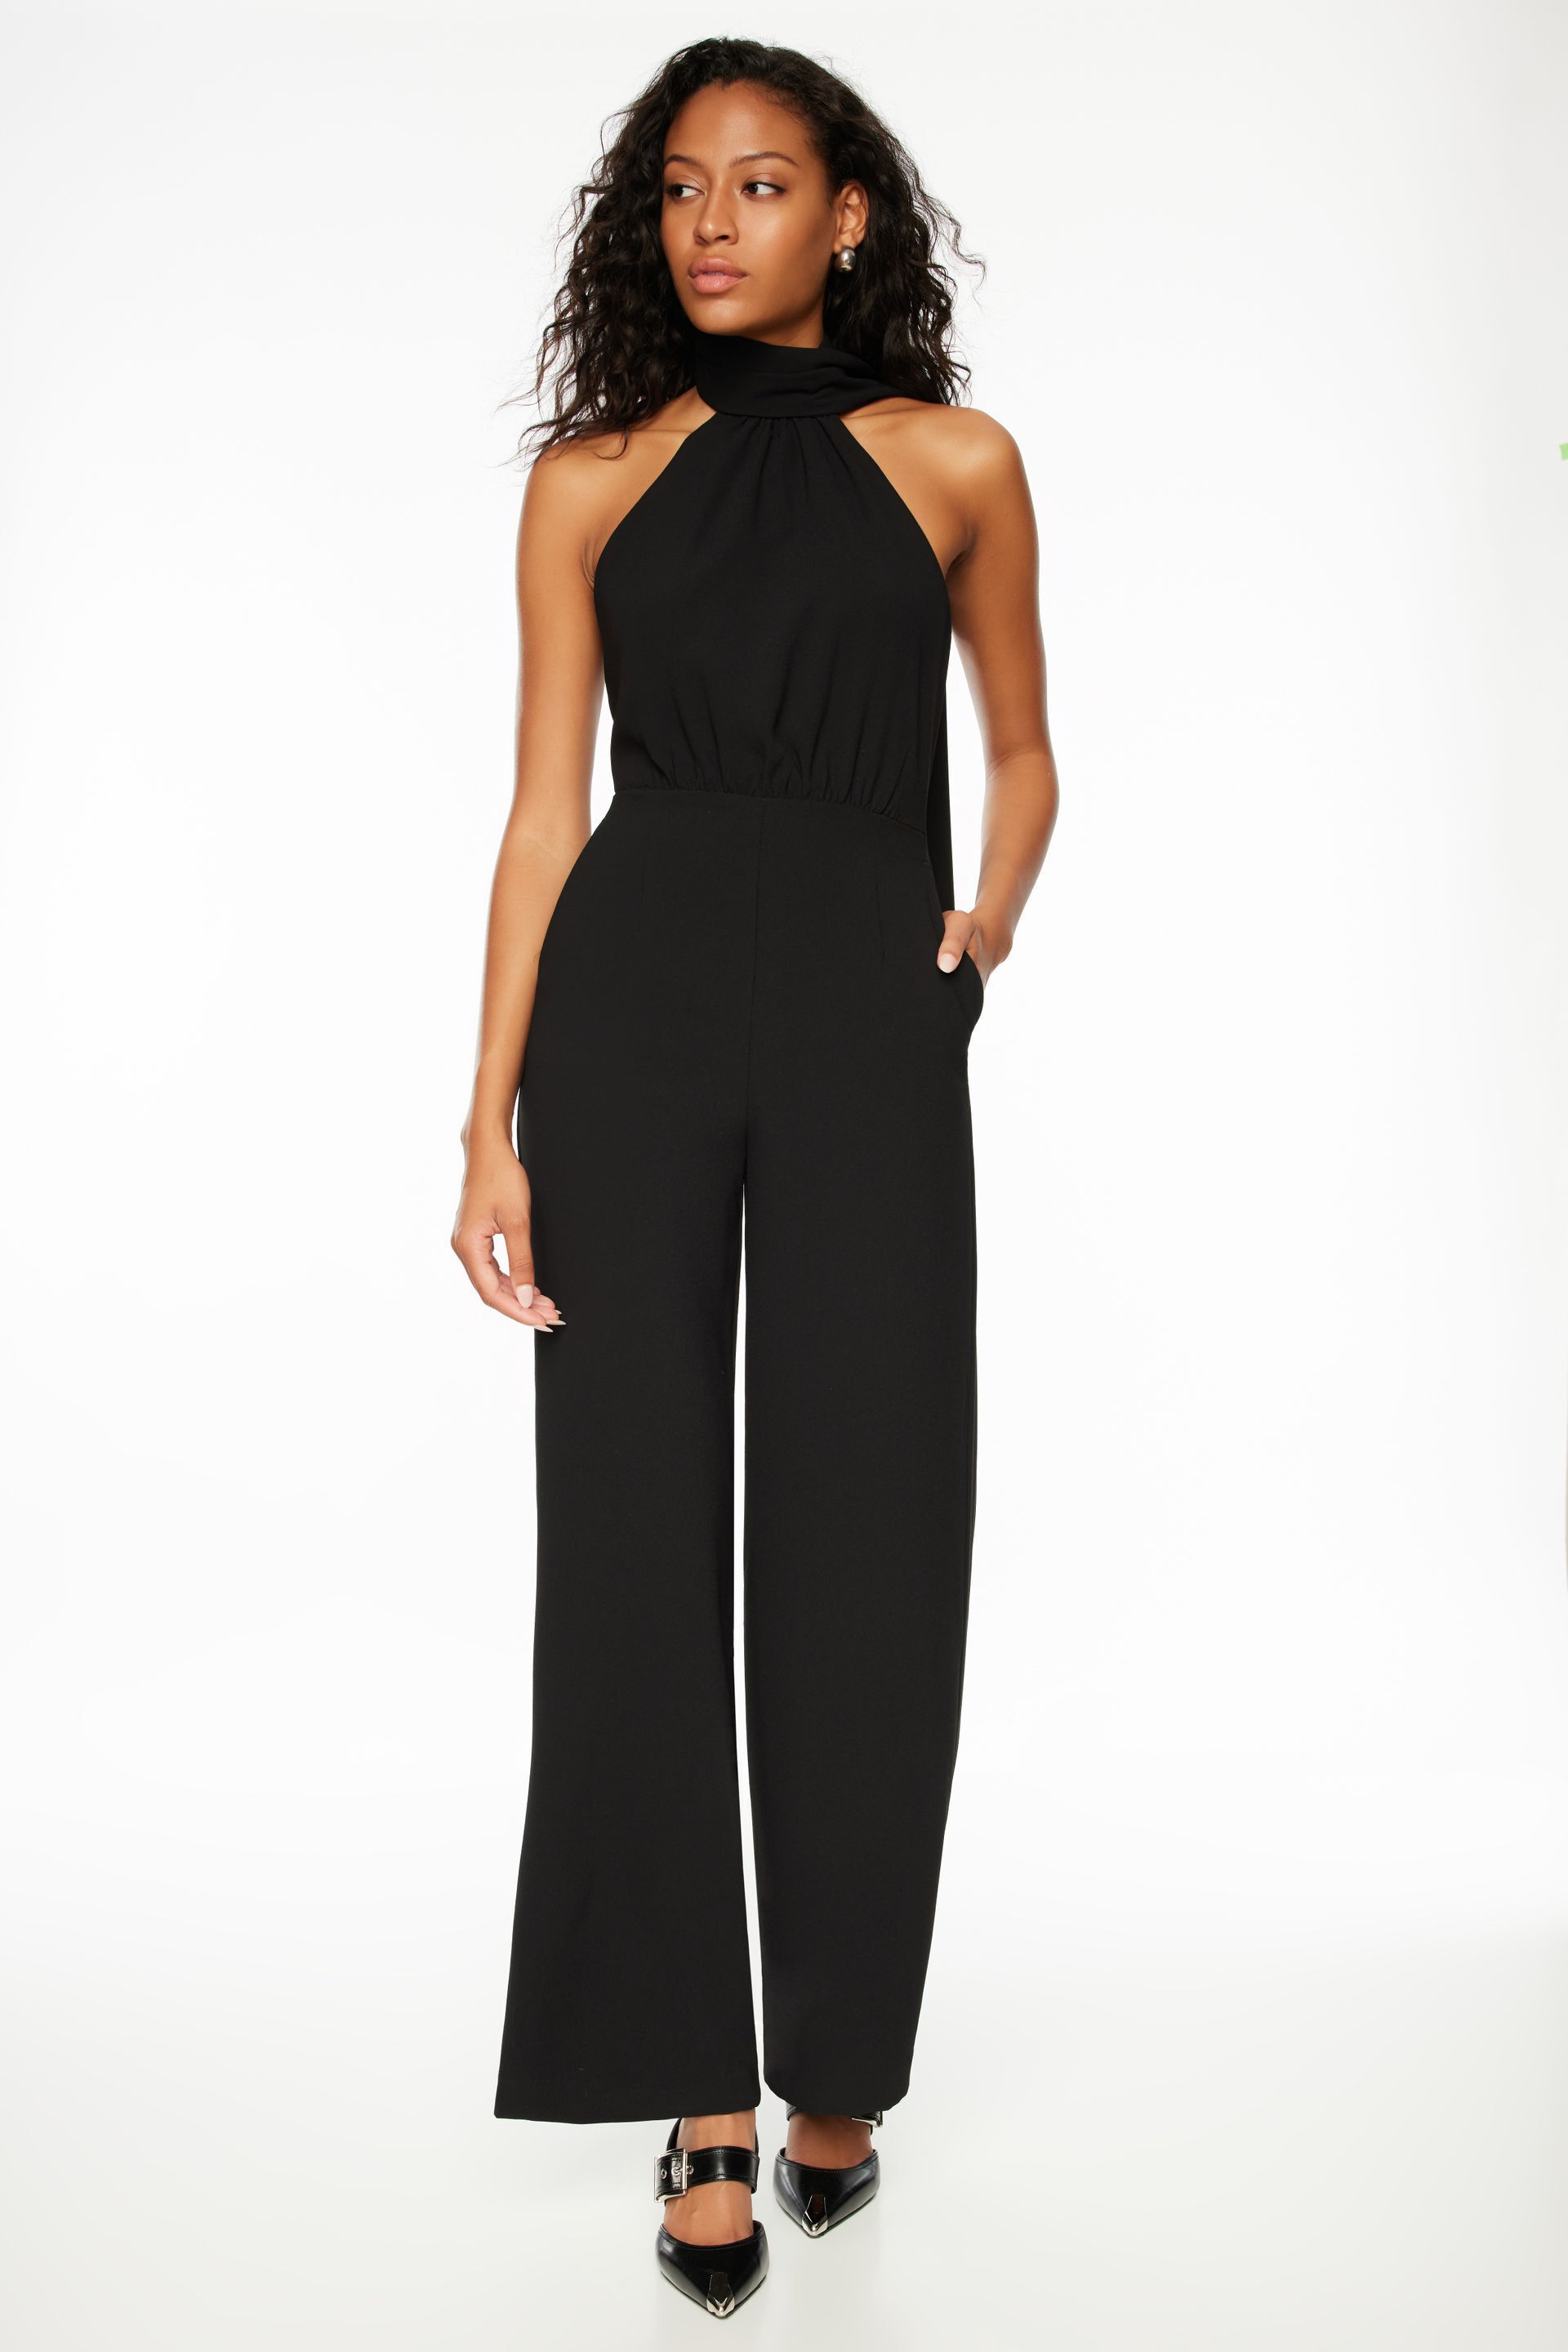 Buy Black Dress Jumpsuit Online In India  Etsy India